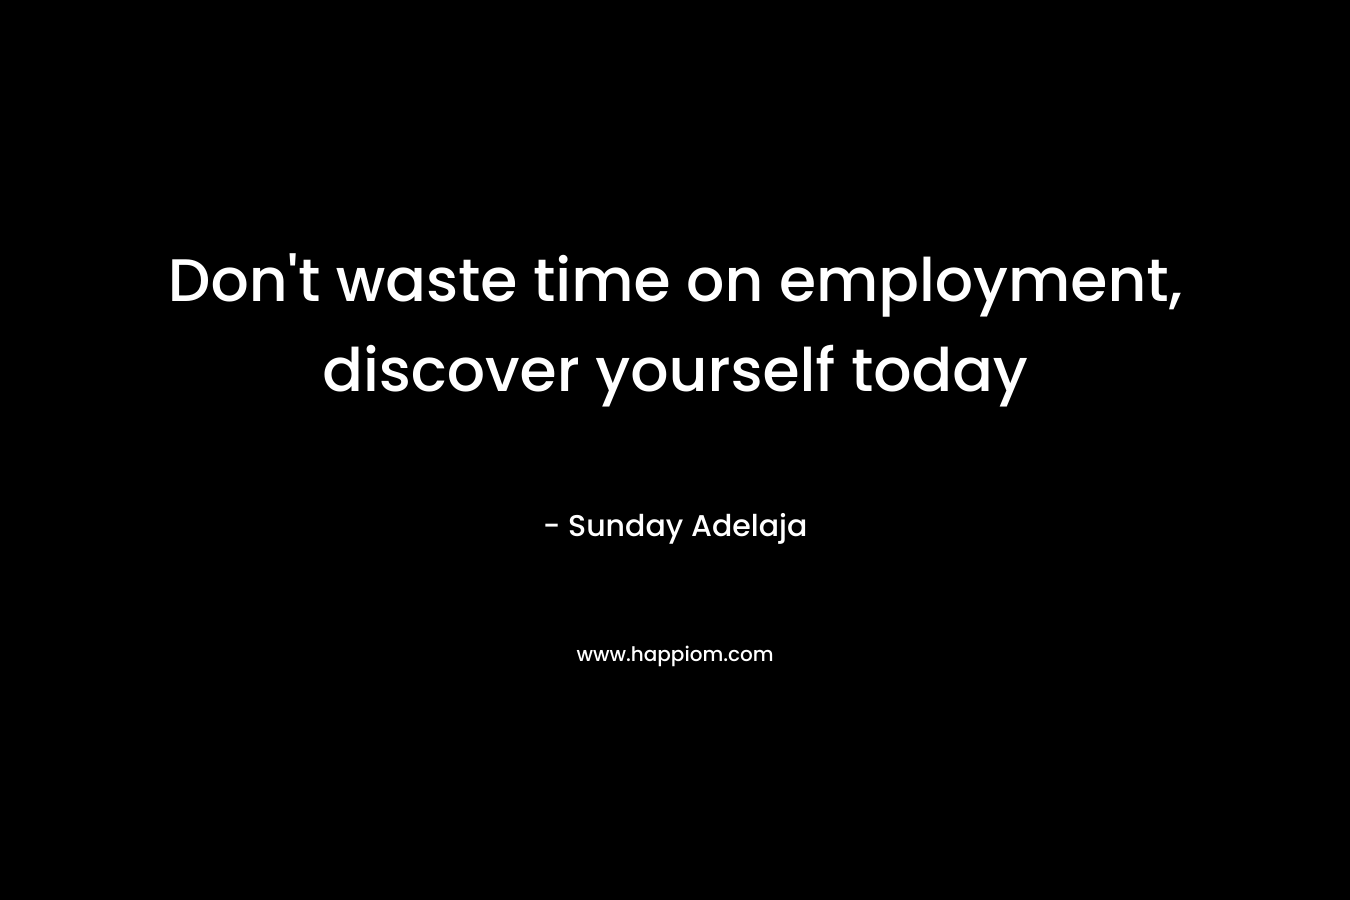 Don't waste time on employment, discover yourself today